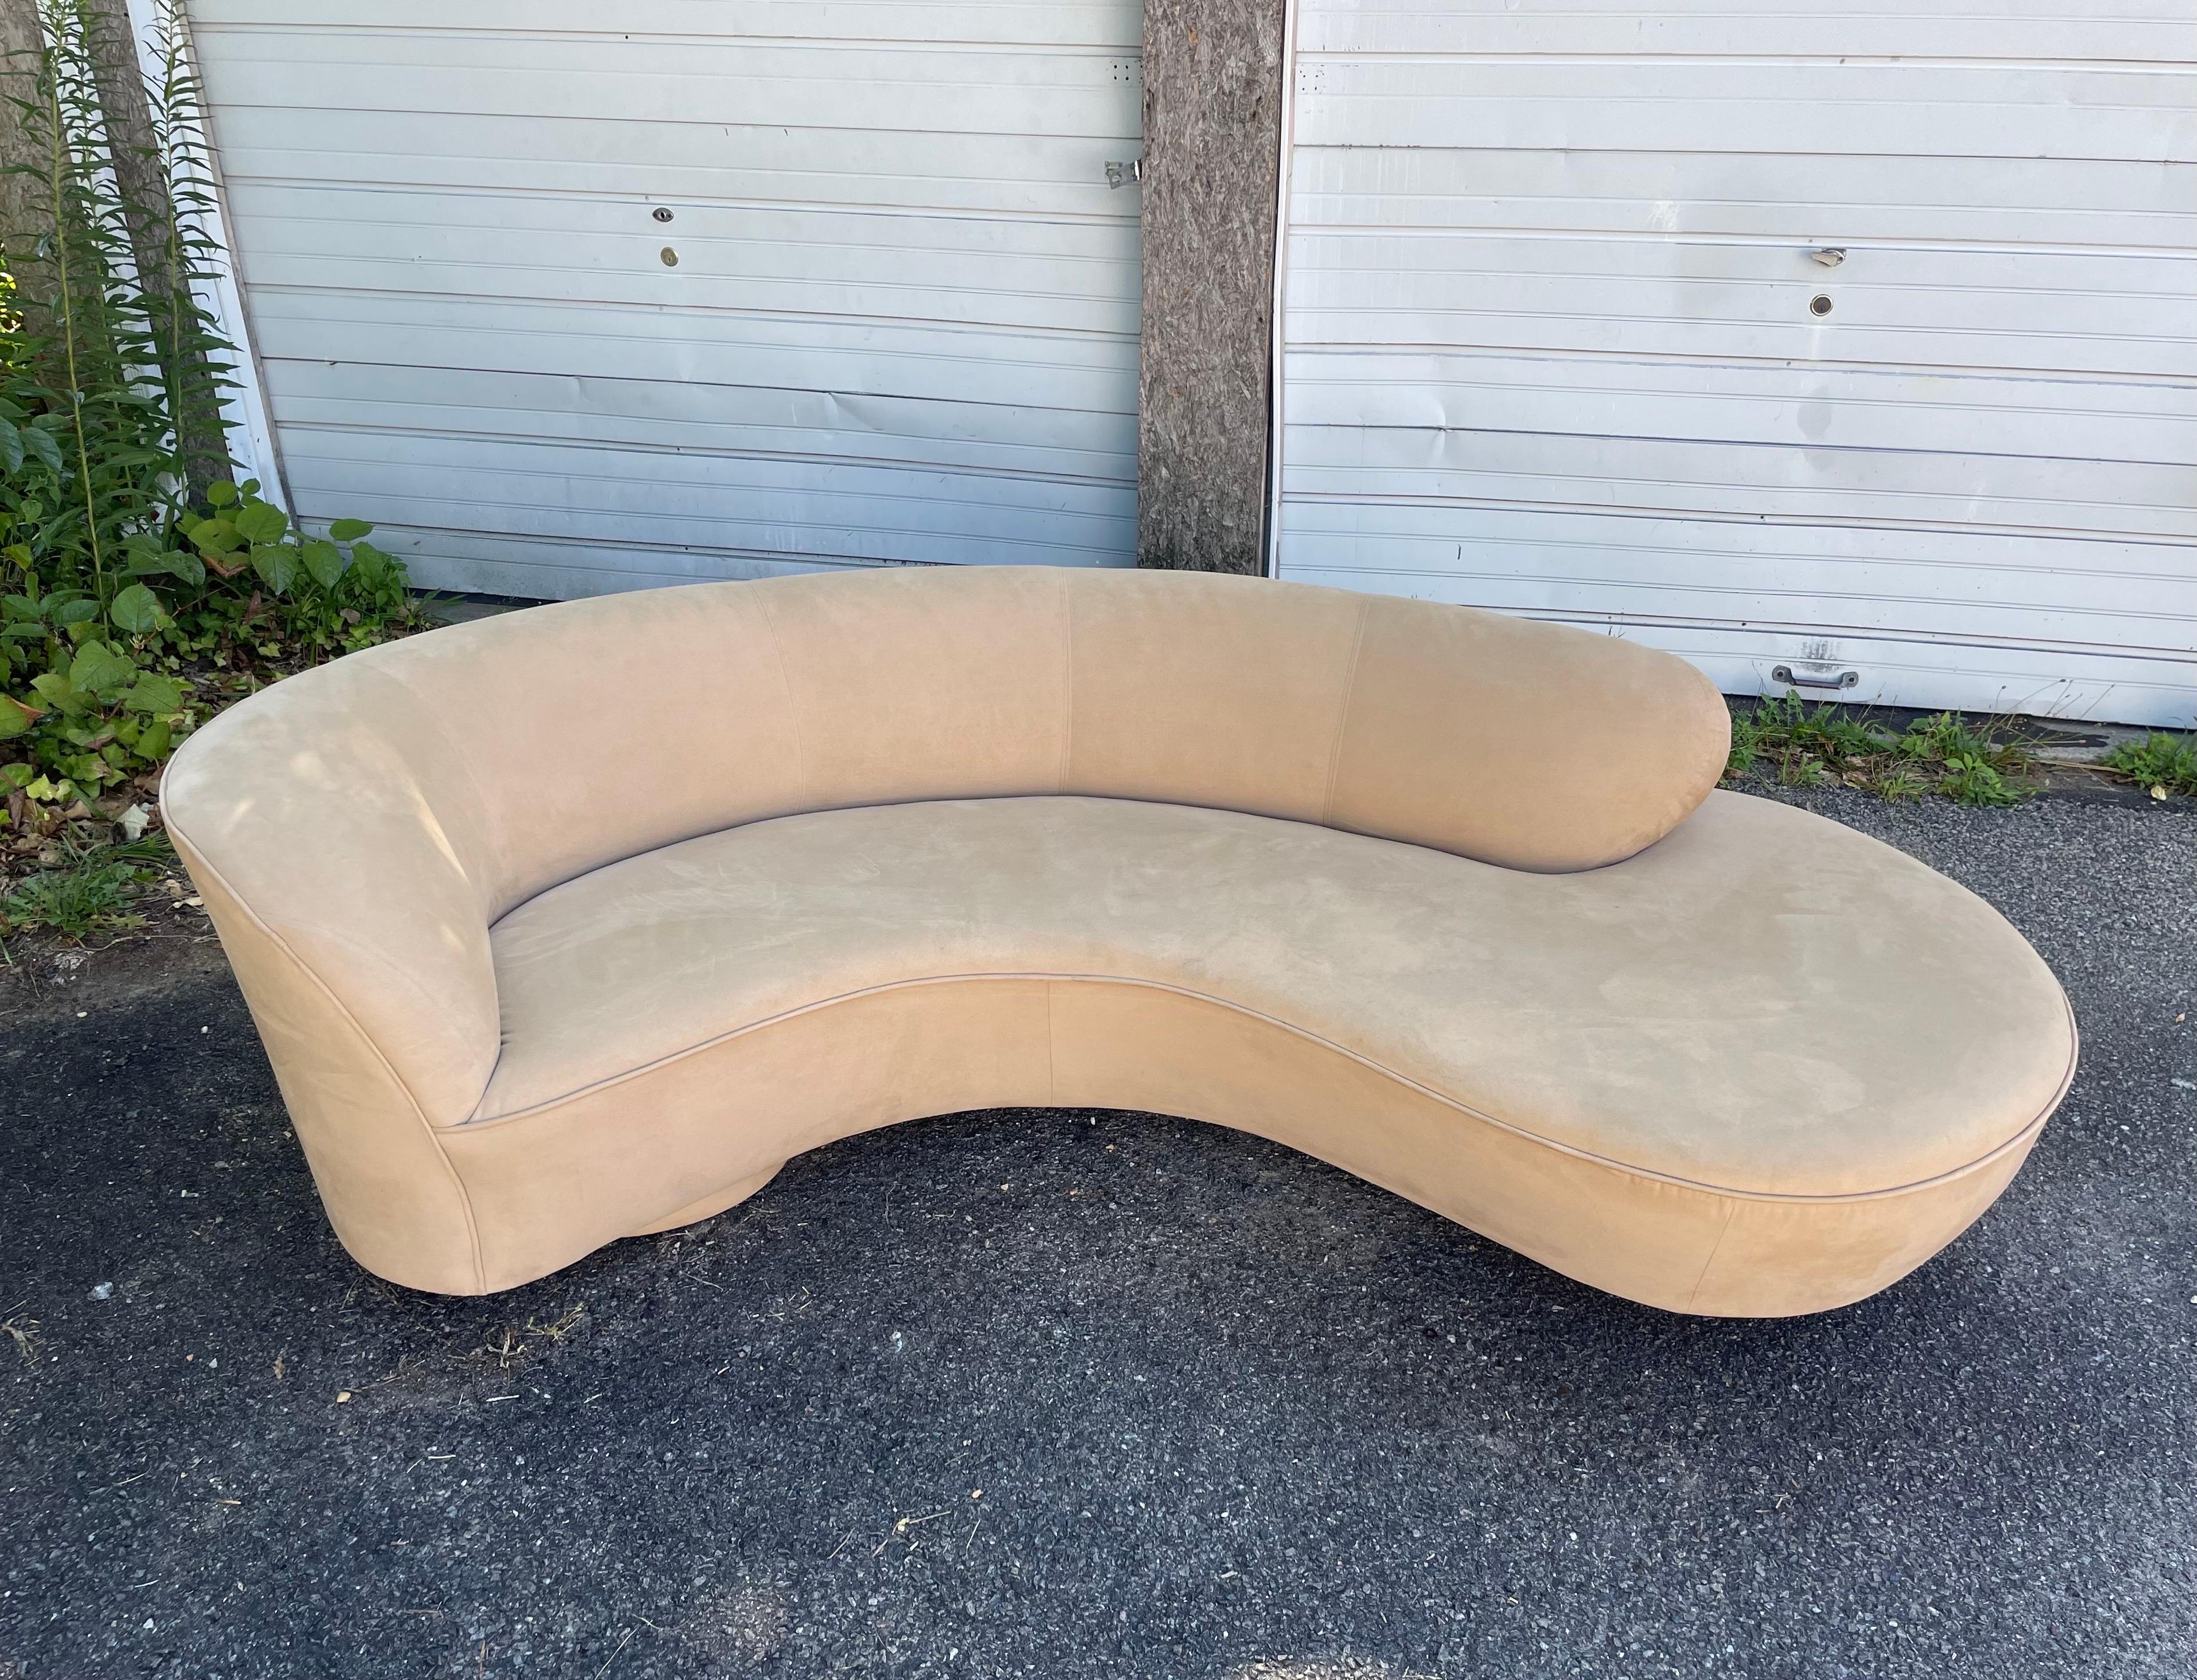 A Vladimir Kagan designed sofa by Directional with original microfiber upholstery and lucite support. Bears its original tag.

CONDITION NOTES
No rips but some faint staining that may come out with an additional professional cleaning. The foam is